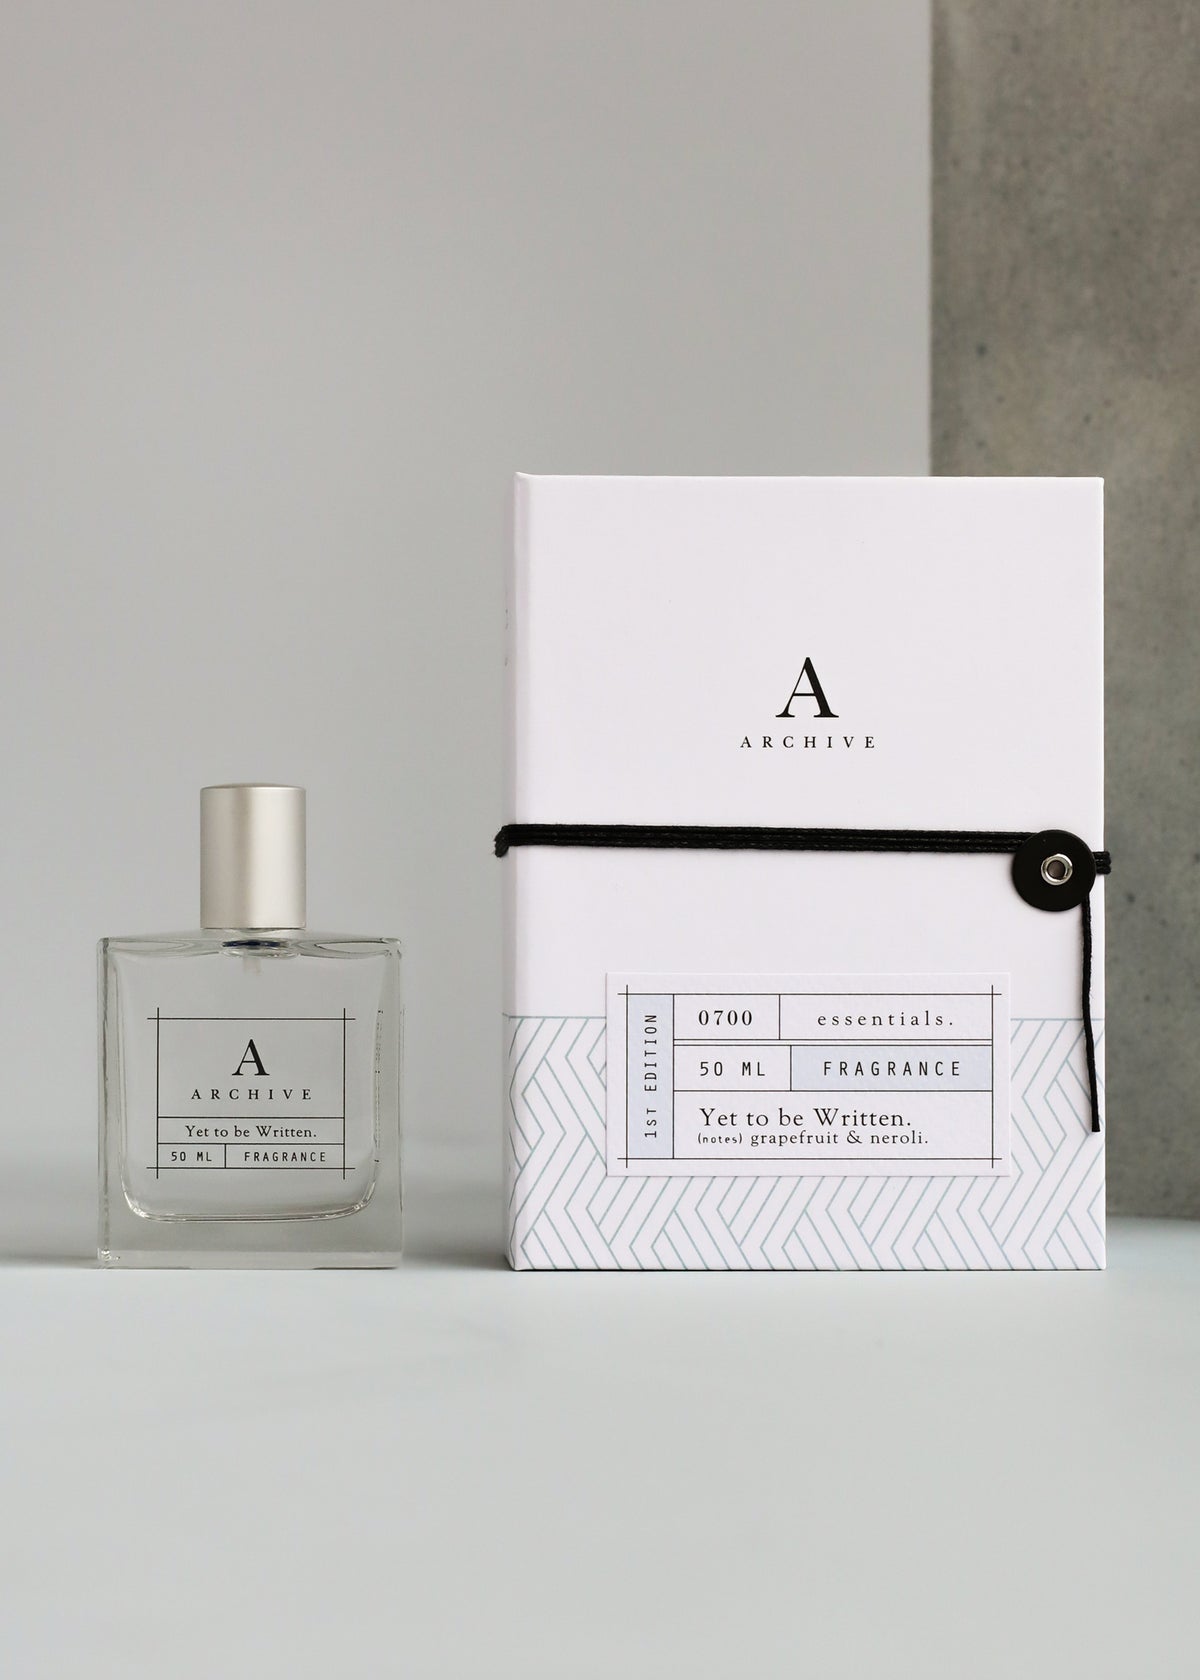 A bottle of ARCHIVE by Margot Elena - Yet to be Written Fragrance perfume next to its keepsake box, displayed against a plain gray background. The box is white with black text and a geometric design.